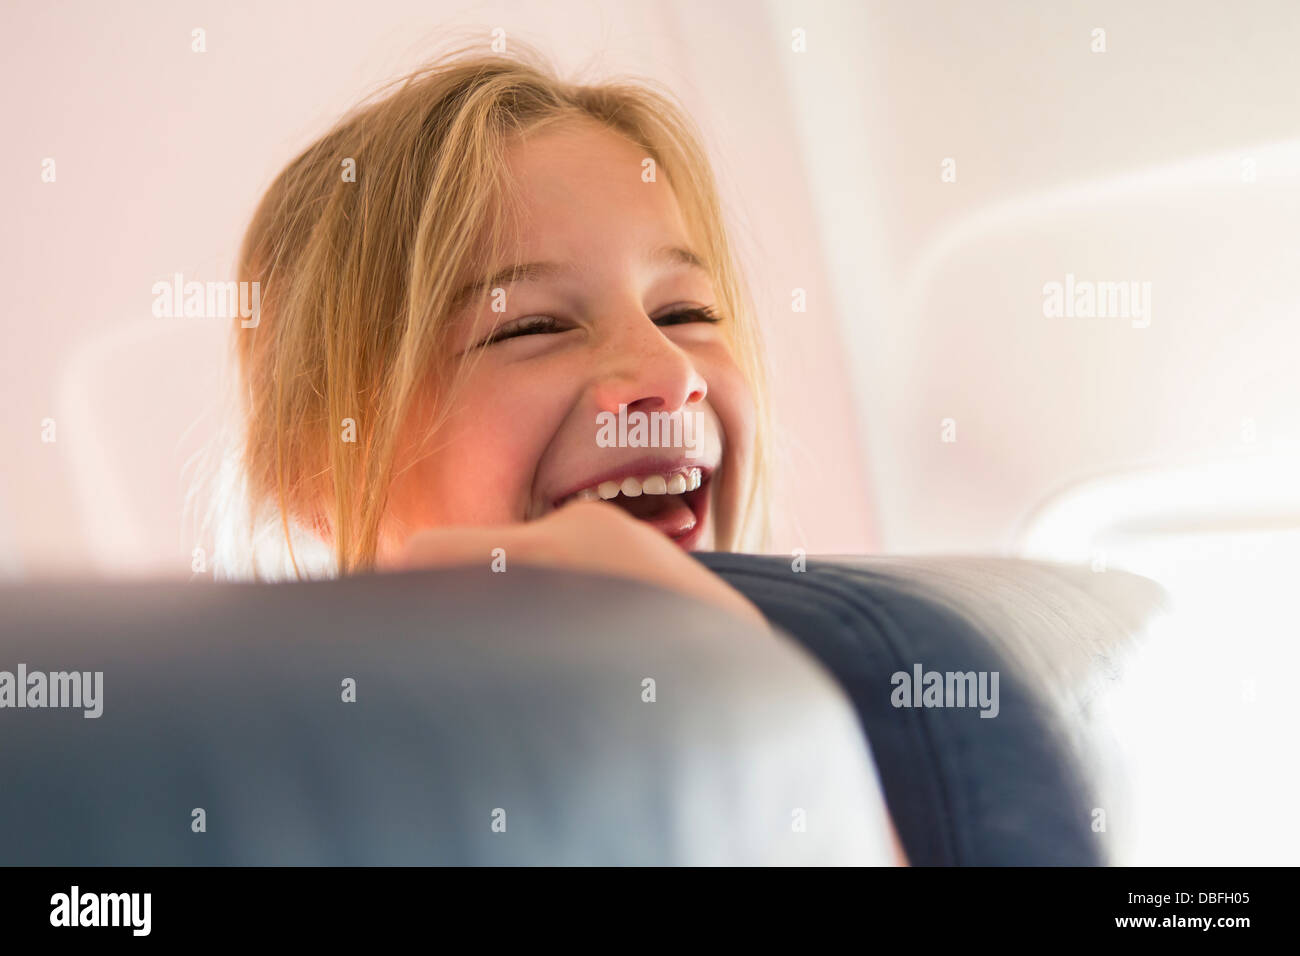 Caucasian girl laughing on airplane Banque D'Images